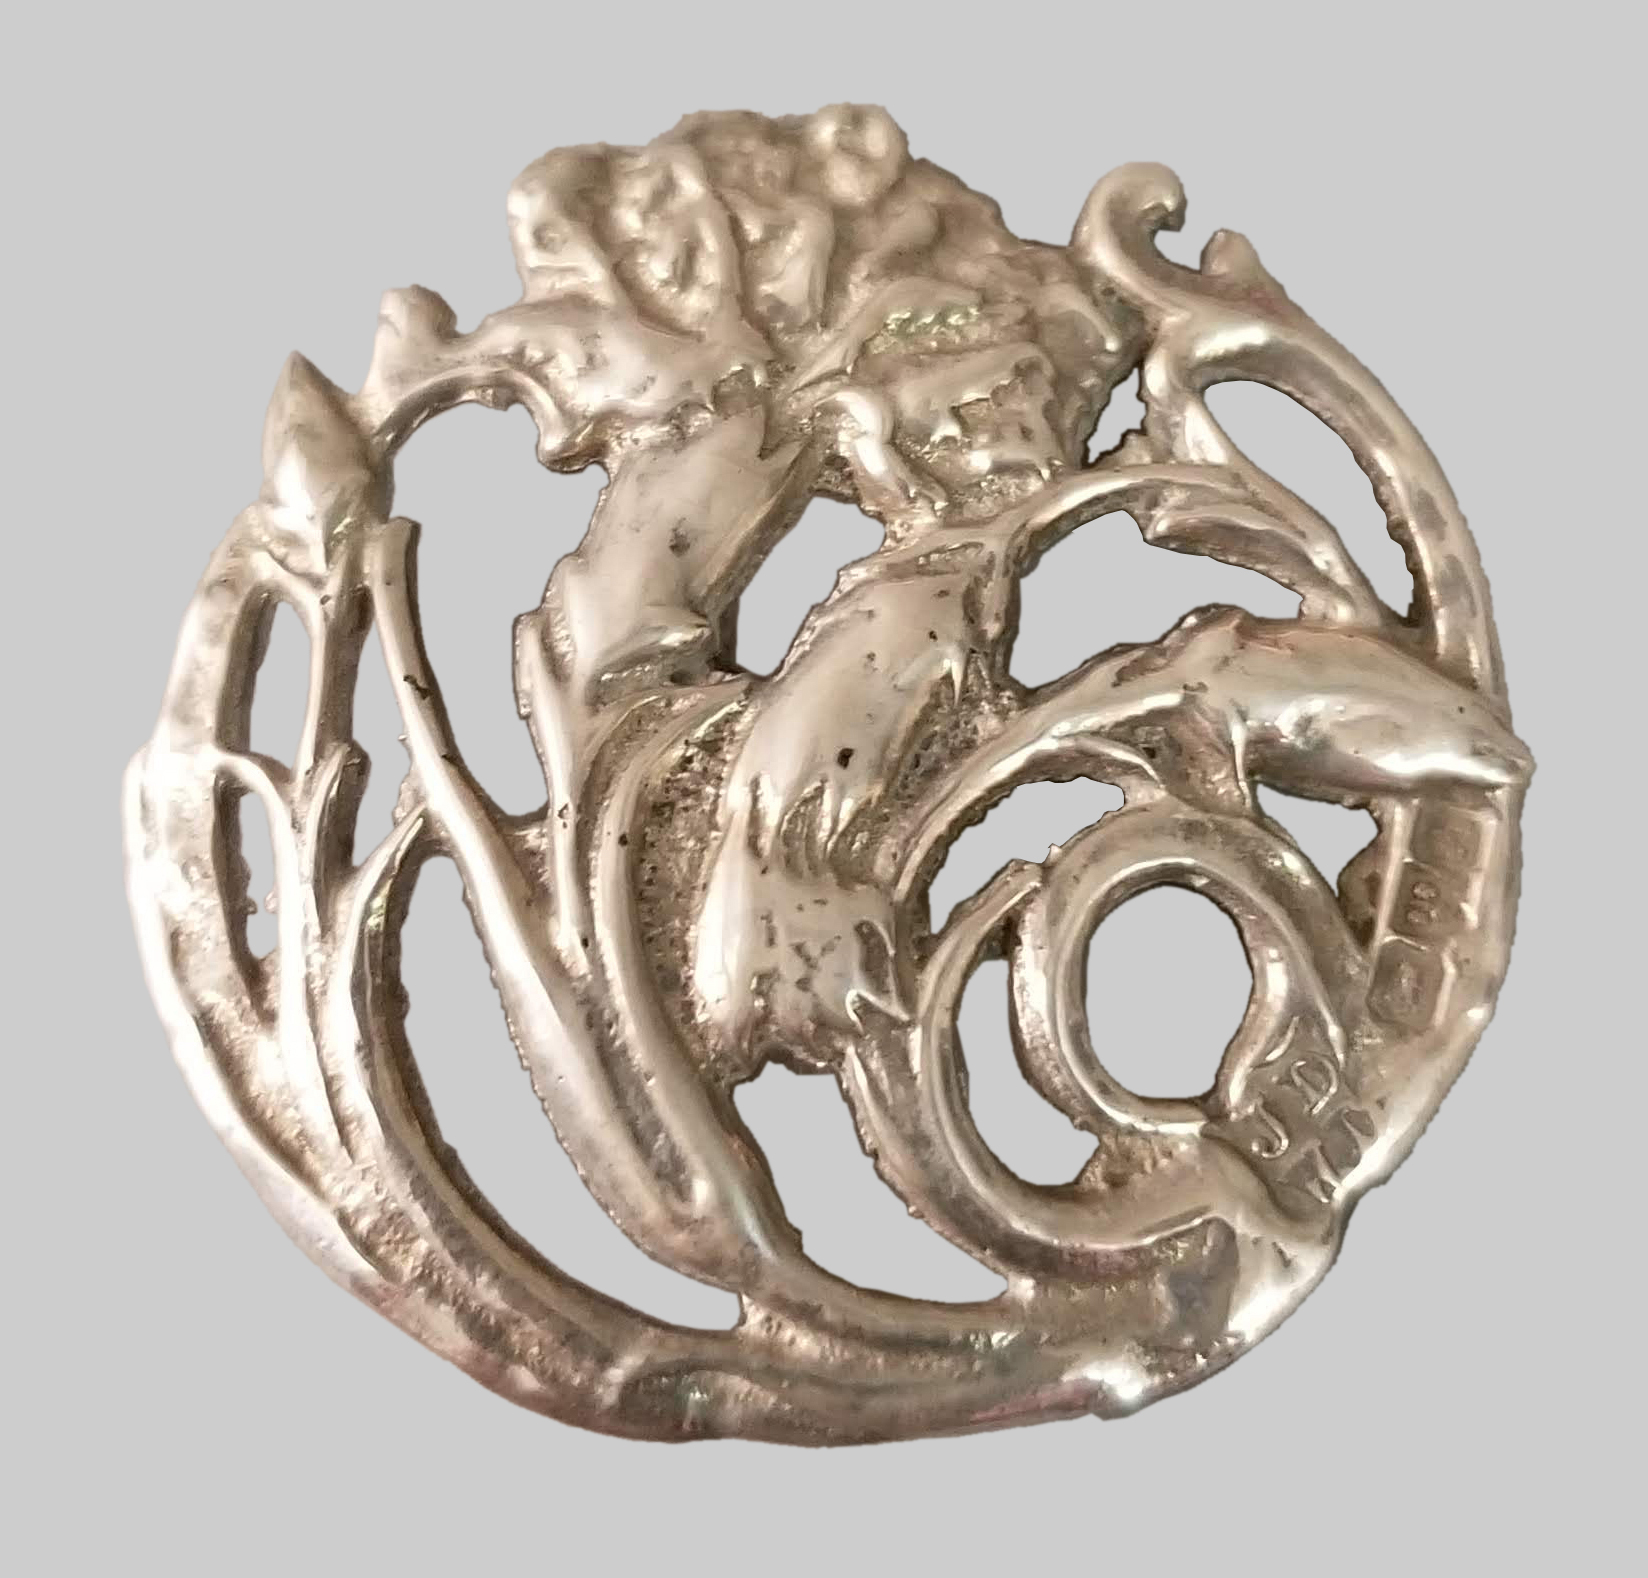 Fig. 5b - James Deakin & Sons Ltd., Buttons with carnations, 1901, sterling silver, TRRF Collection.